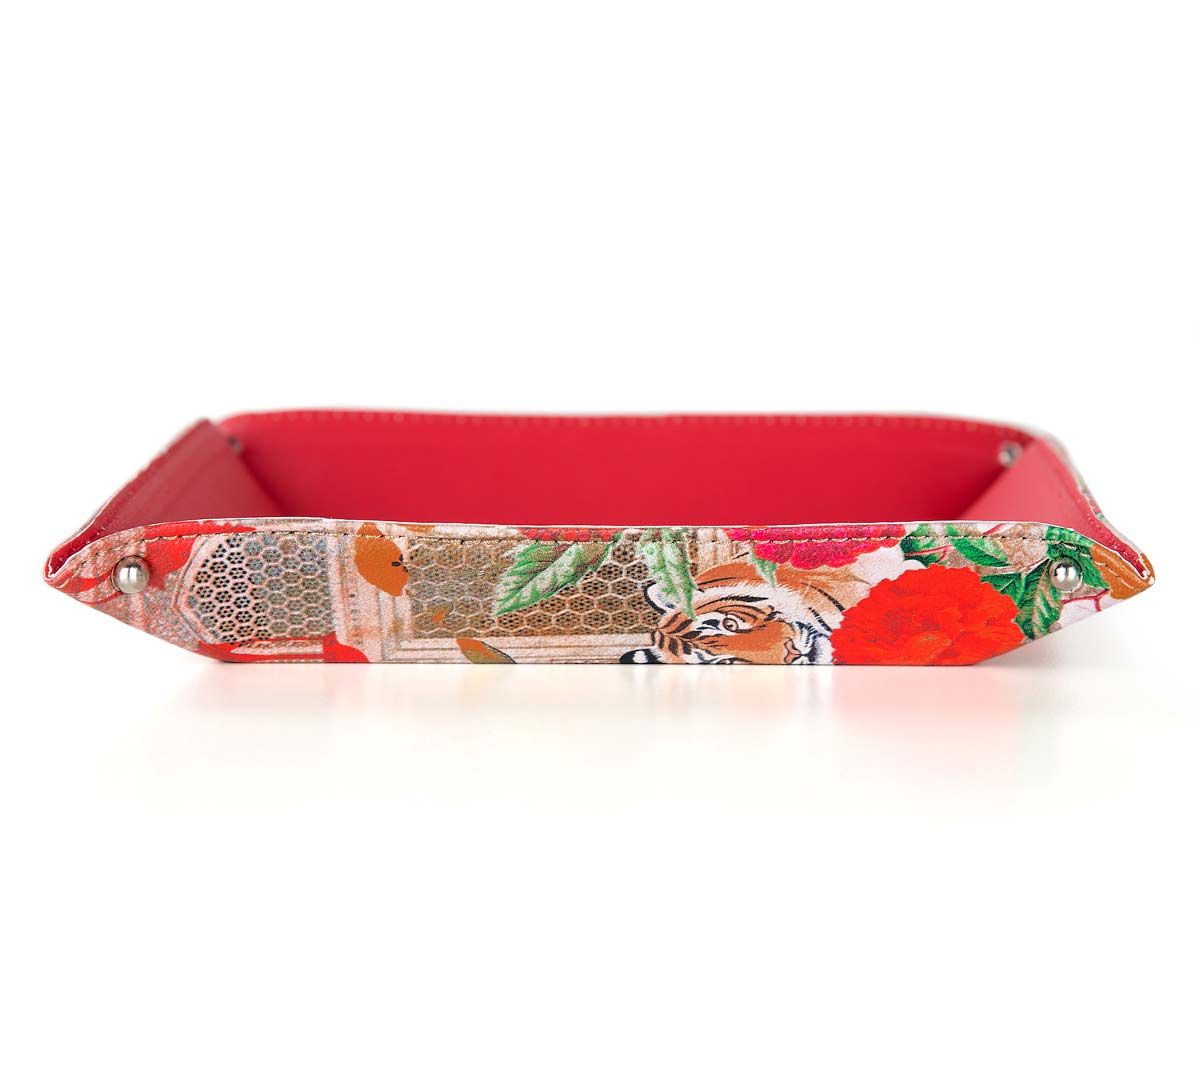 India Circus Floral Burst Valet/Accessory Tray